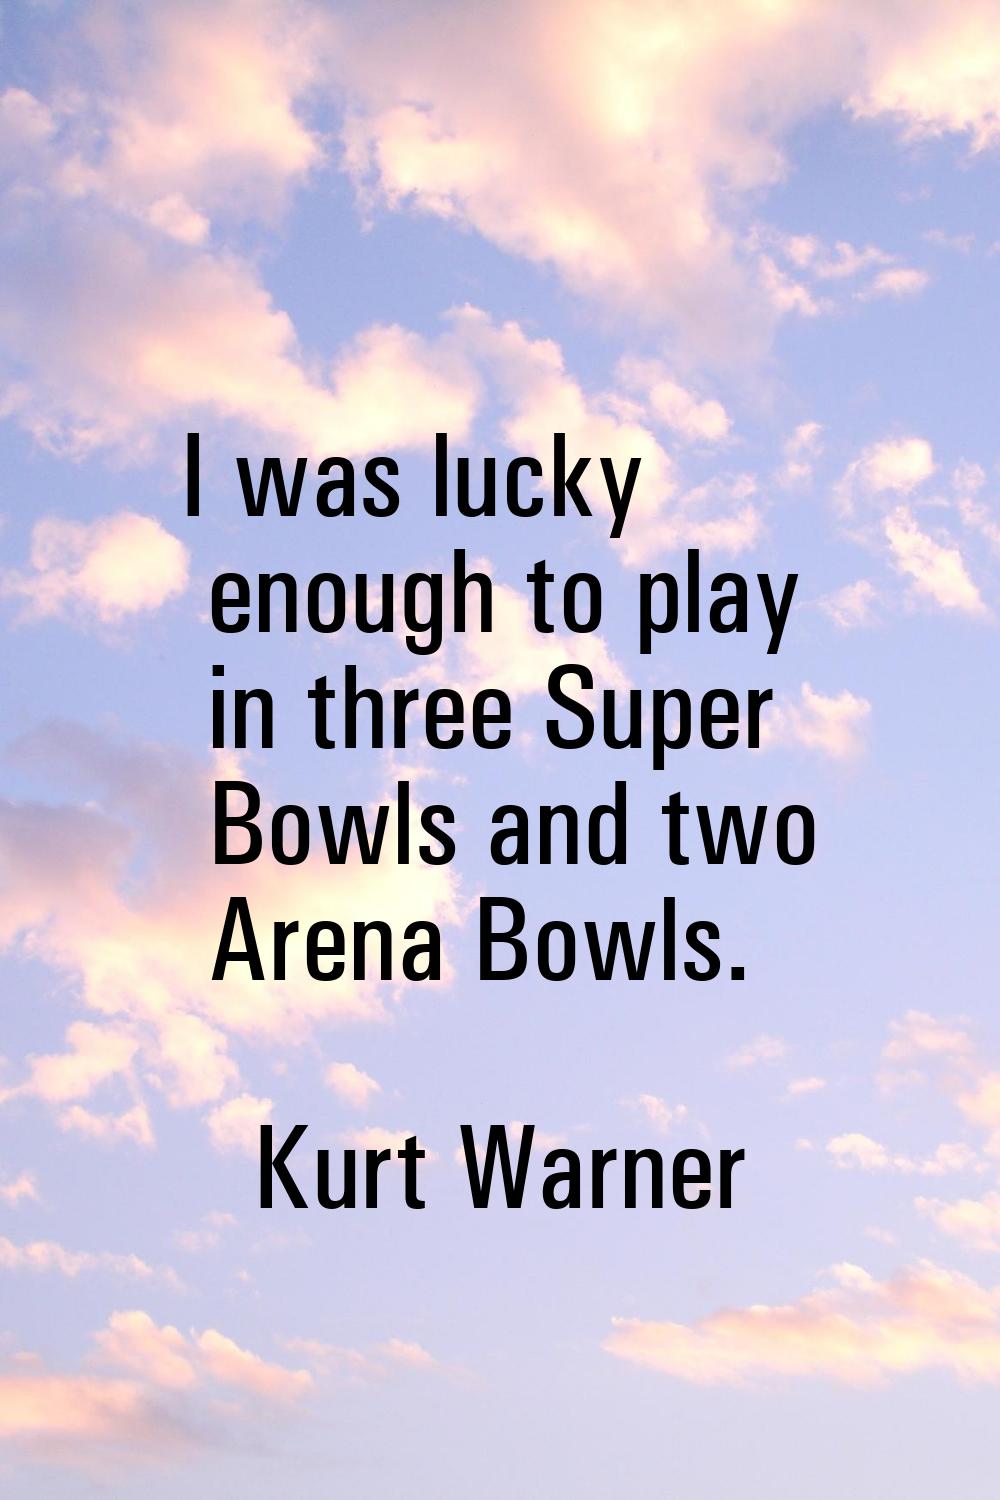 I was lucky enough to play in three Super Bowls and two Arena Bowls.